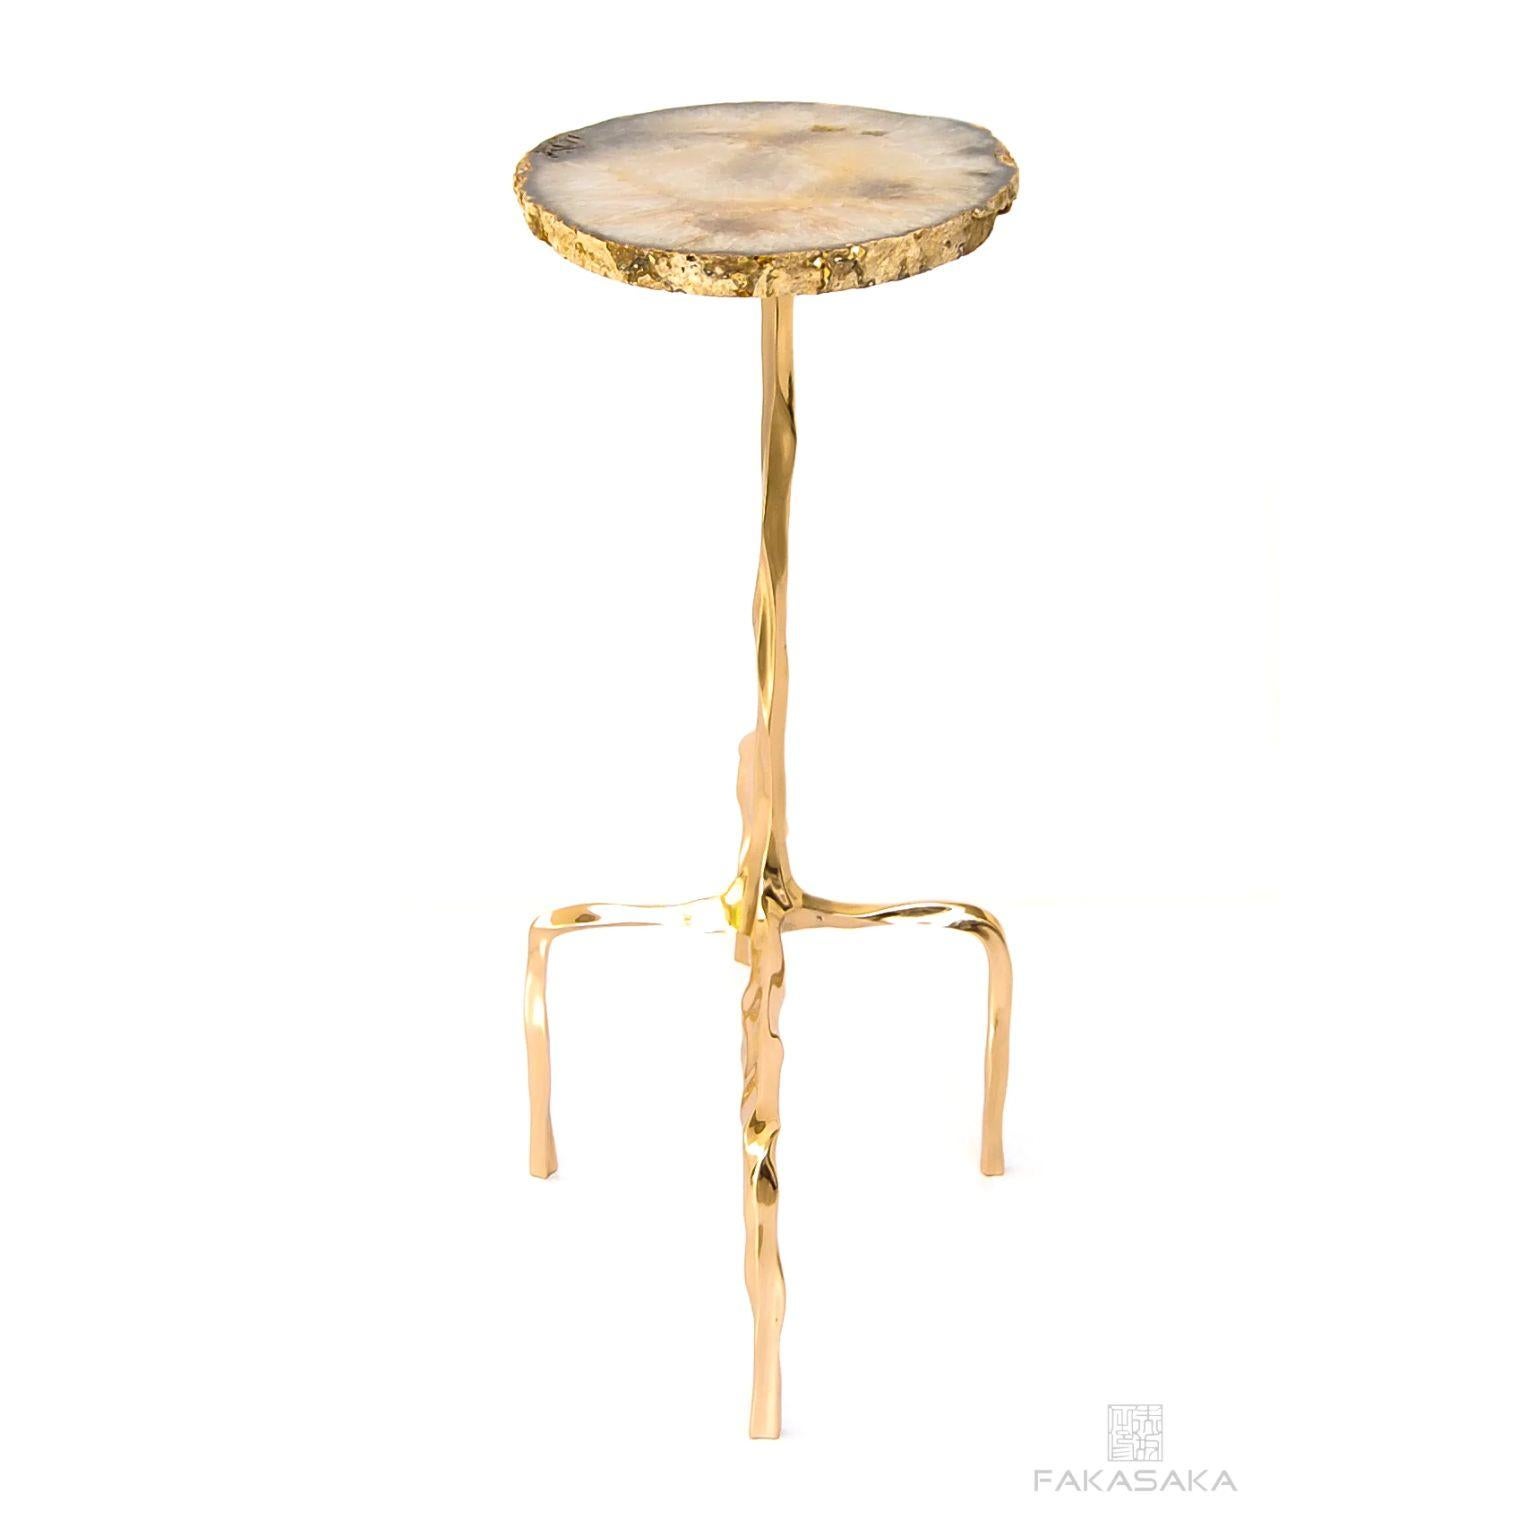 Other Presley Drink Table with Agate Top by Fakasaka Design For Sale